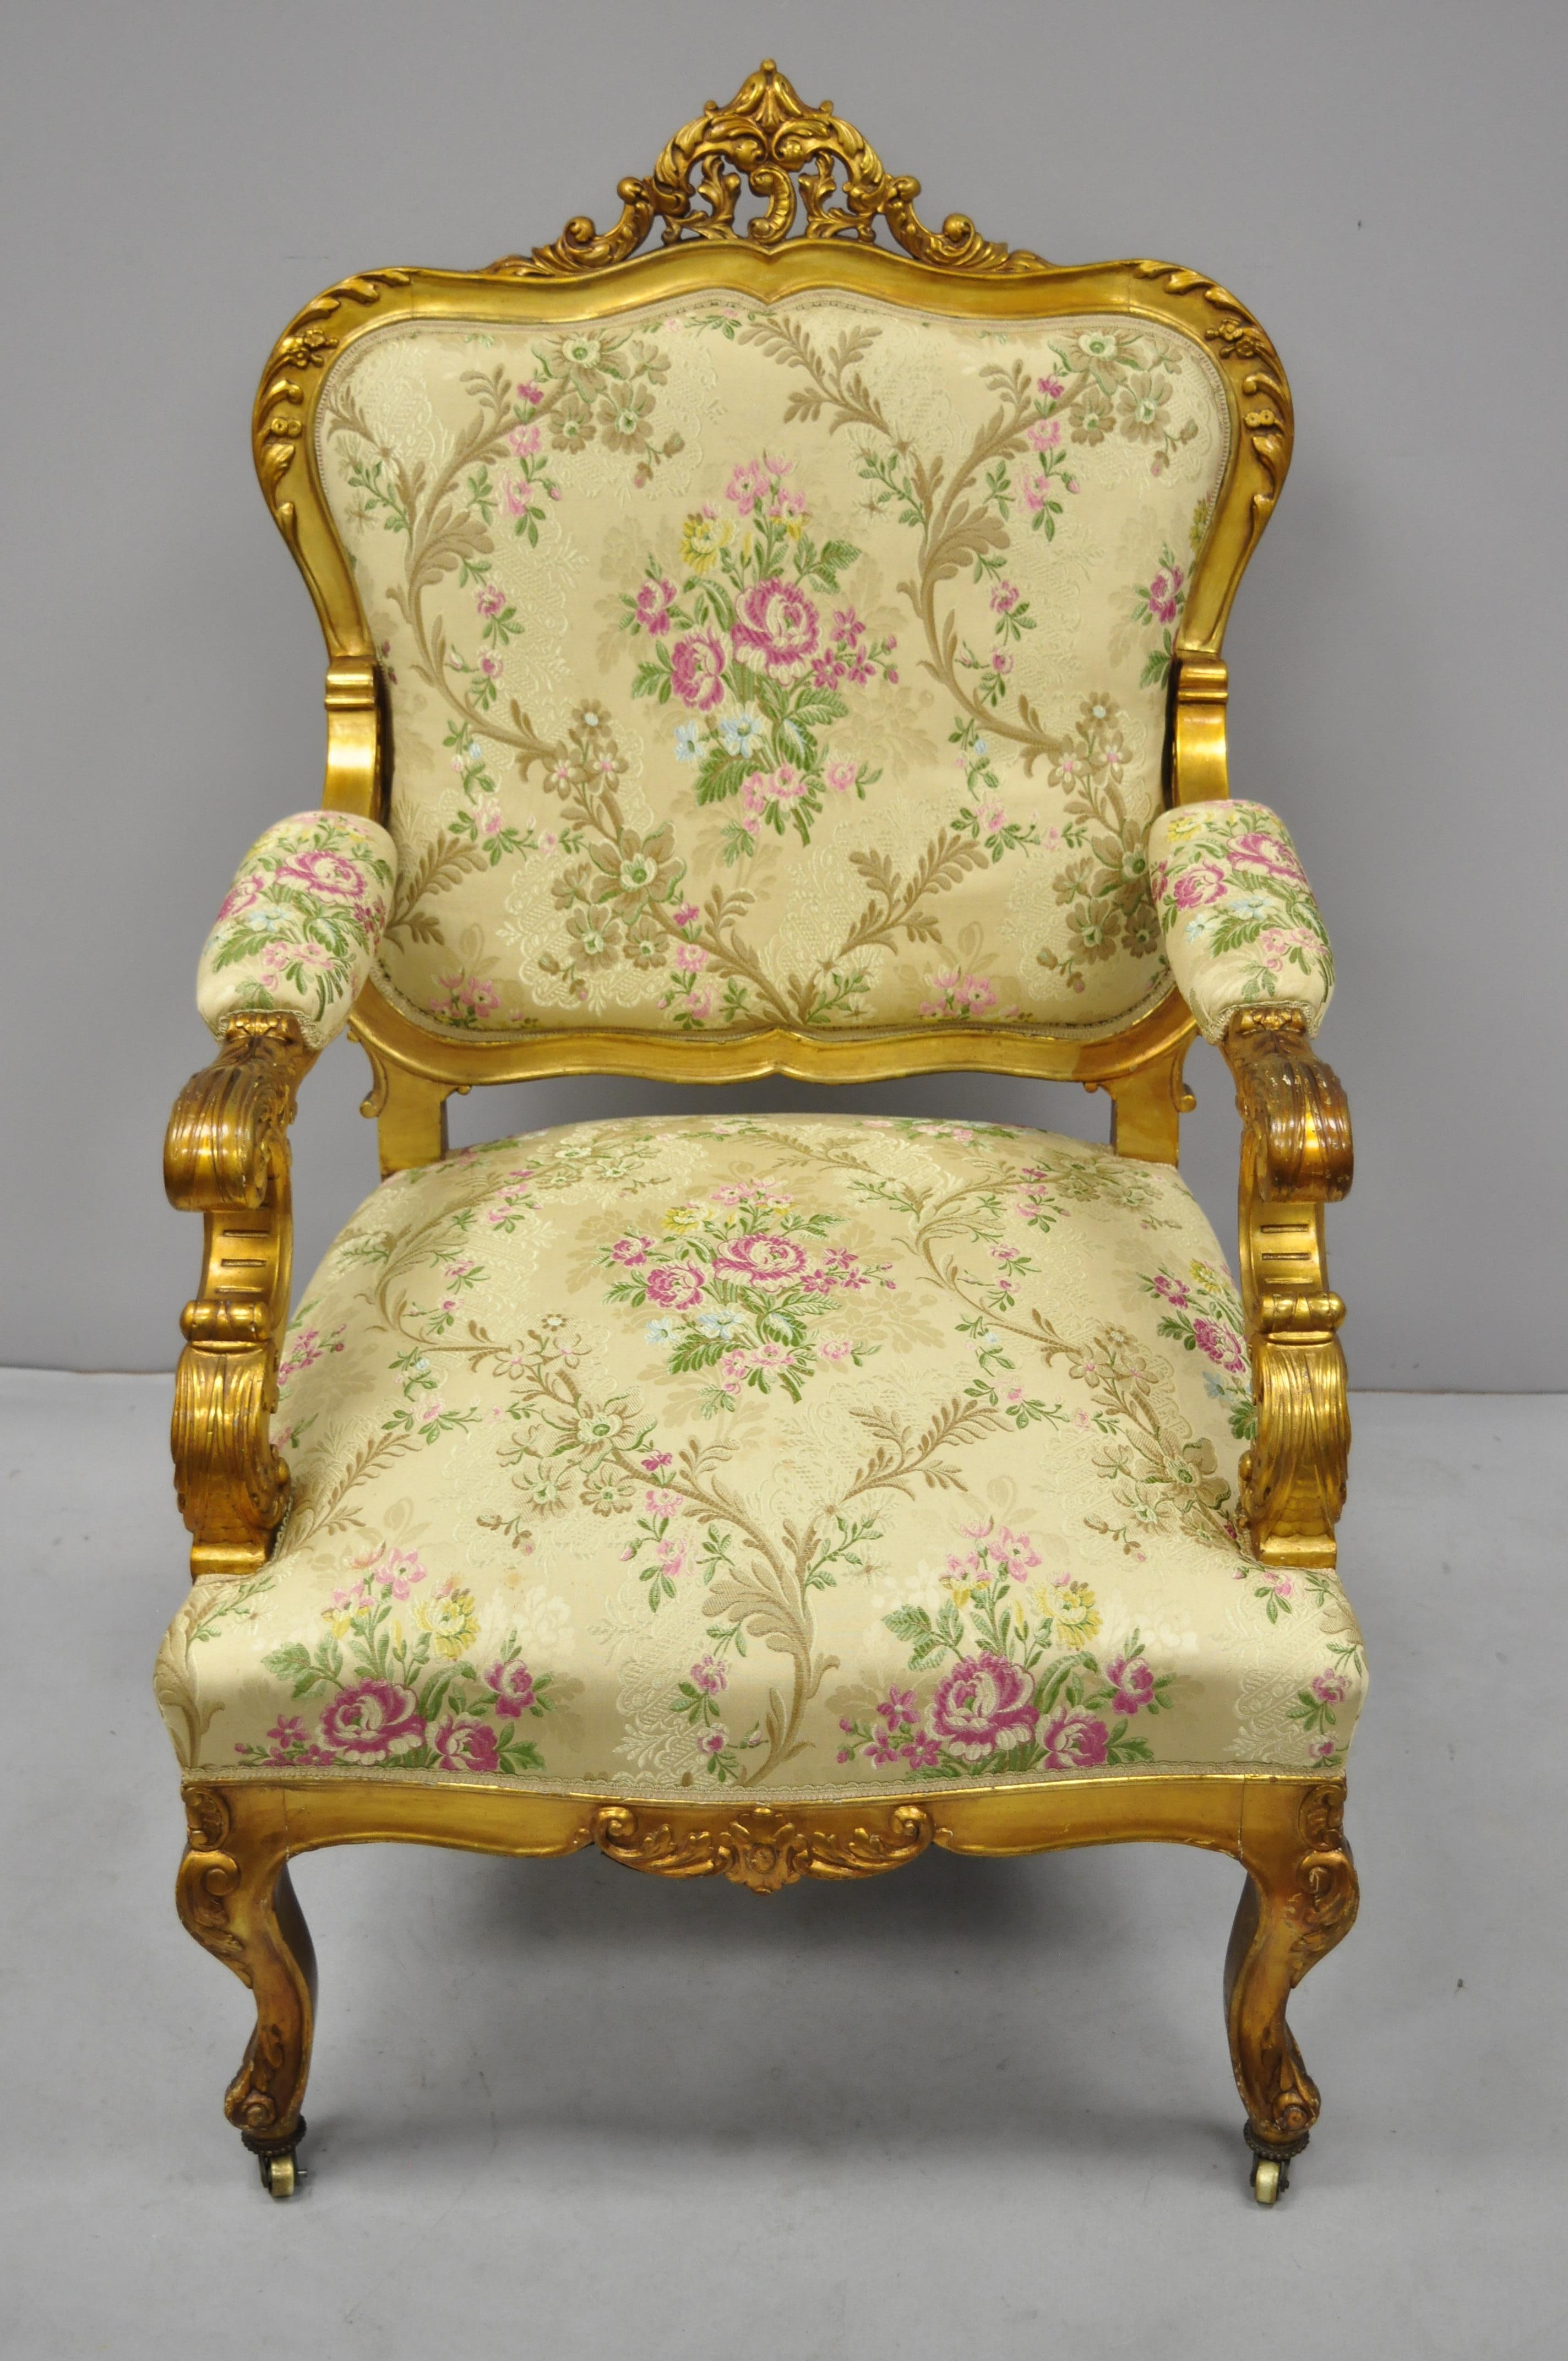 1920s French Louis XV Rococo style gold gilt parlor armchair. Item features brass rolling casters, distressed gold finish, gold fabric with pink flowers, solid wood construction, upholstered armrests, nicely carved details, cabriole legs, very nice